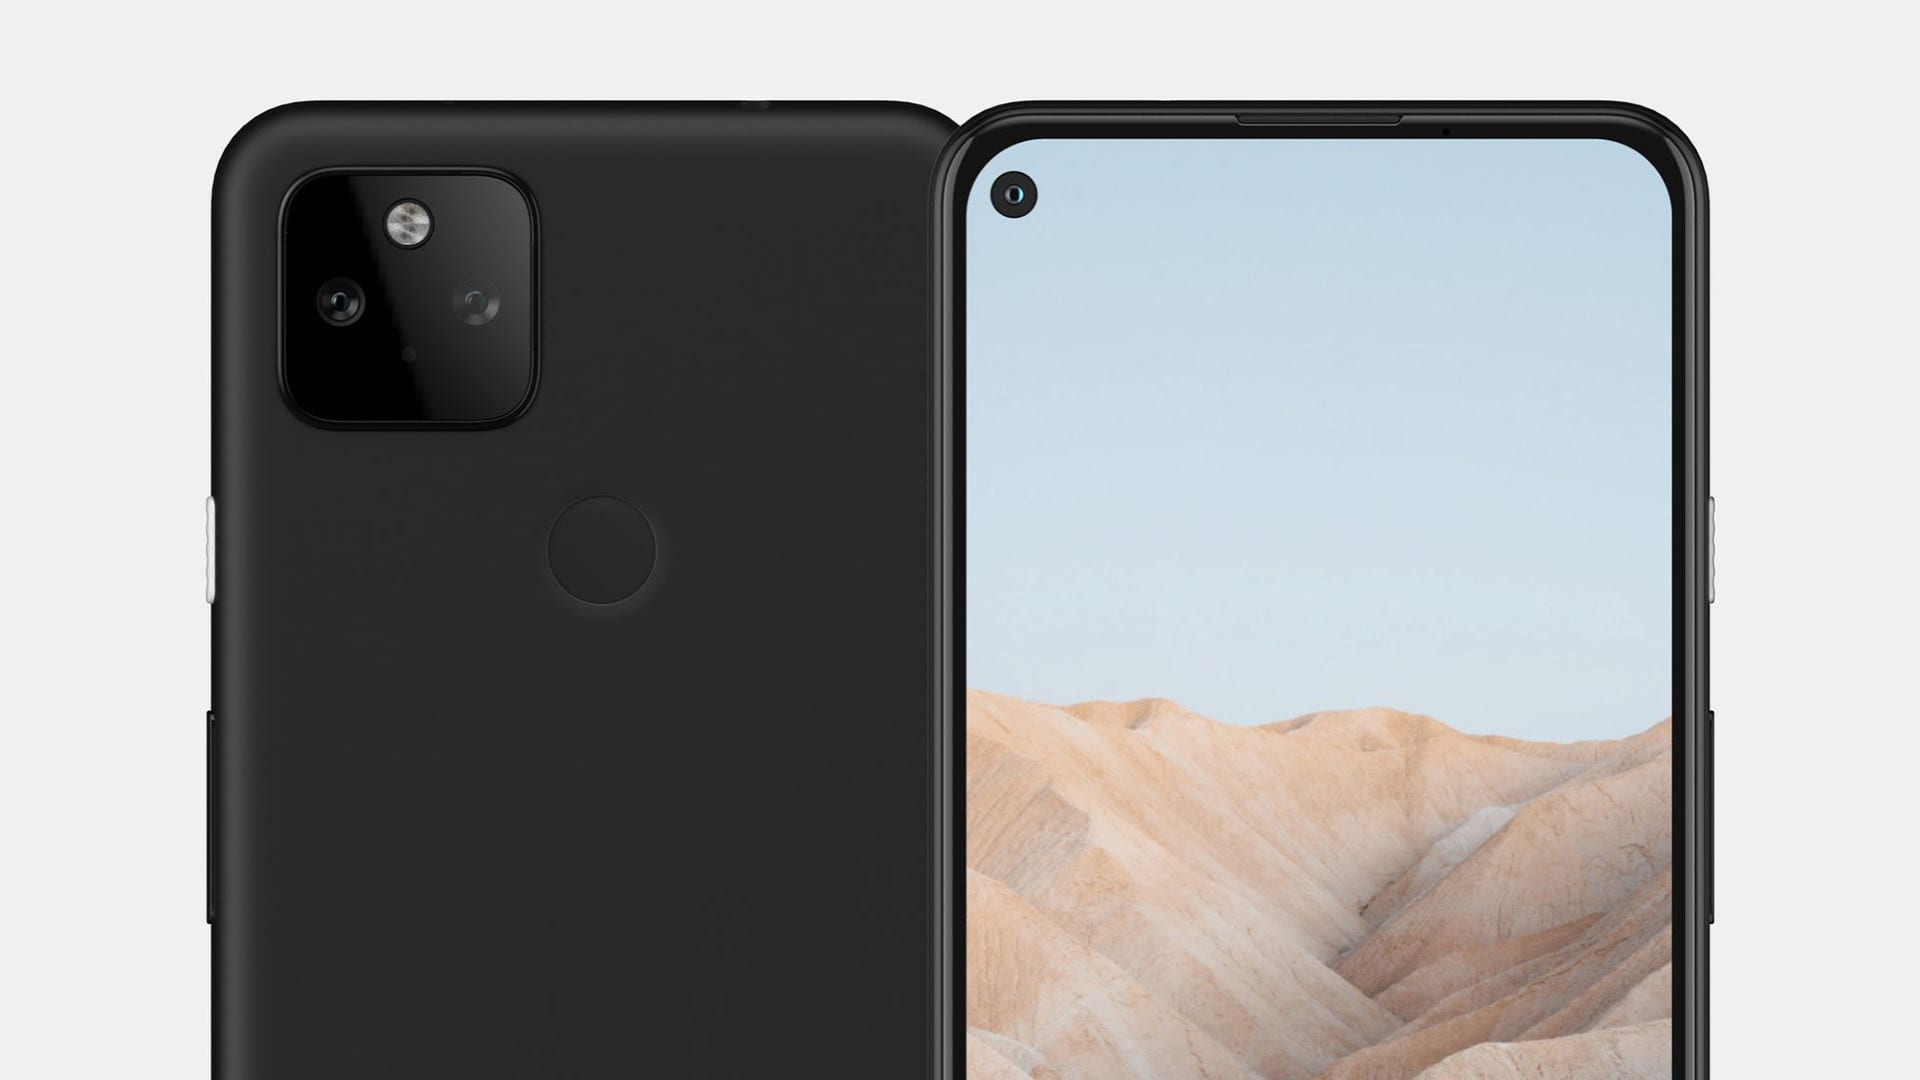 Google Pixel 5a will only appear in a few countries